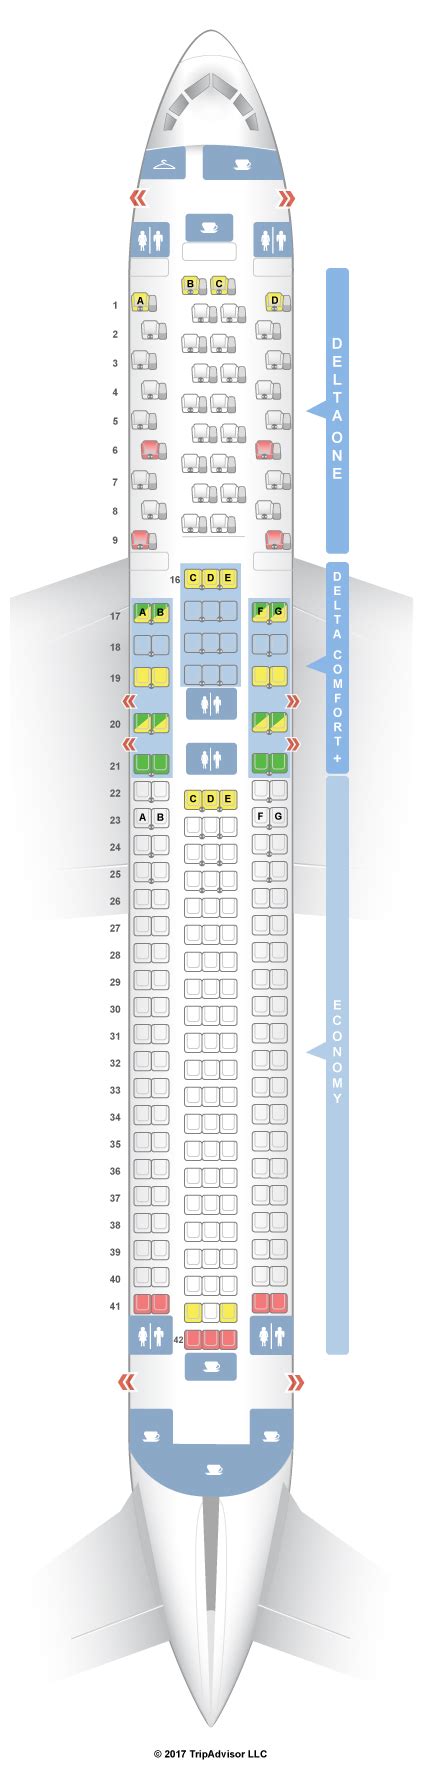 For your next Delta flight, use this seating chart to get the most comfortable seats, legroom, ... Boeing 757-300 (75Y) Boeing 767-300ER (76H/76Z) Layout 3; Boeing 767-300ER (76L) Layout 2; ... SeatGuru was created to help travelers choose the best seats and in-flight amenities. Forum; Mobile; FAQ;. 